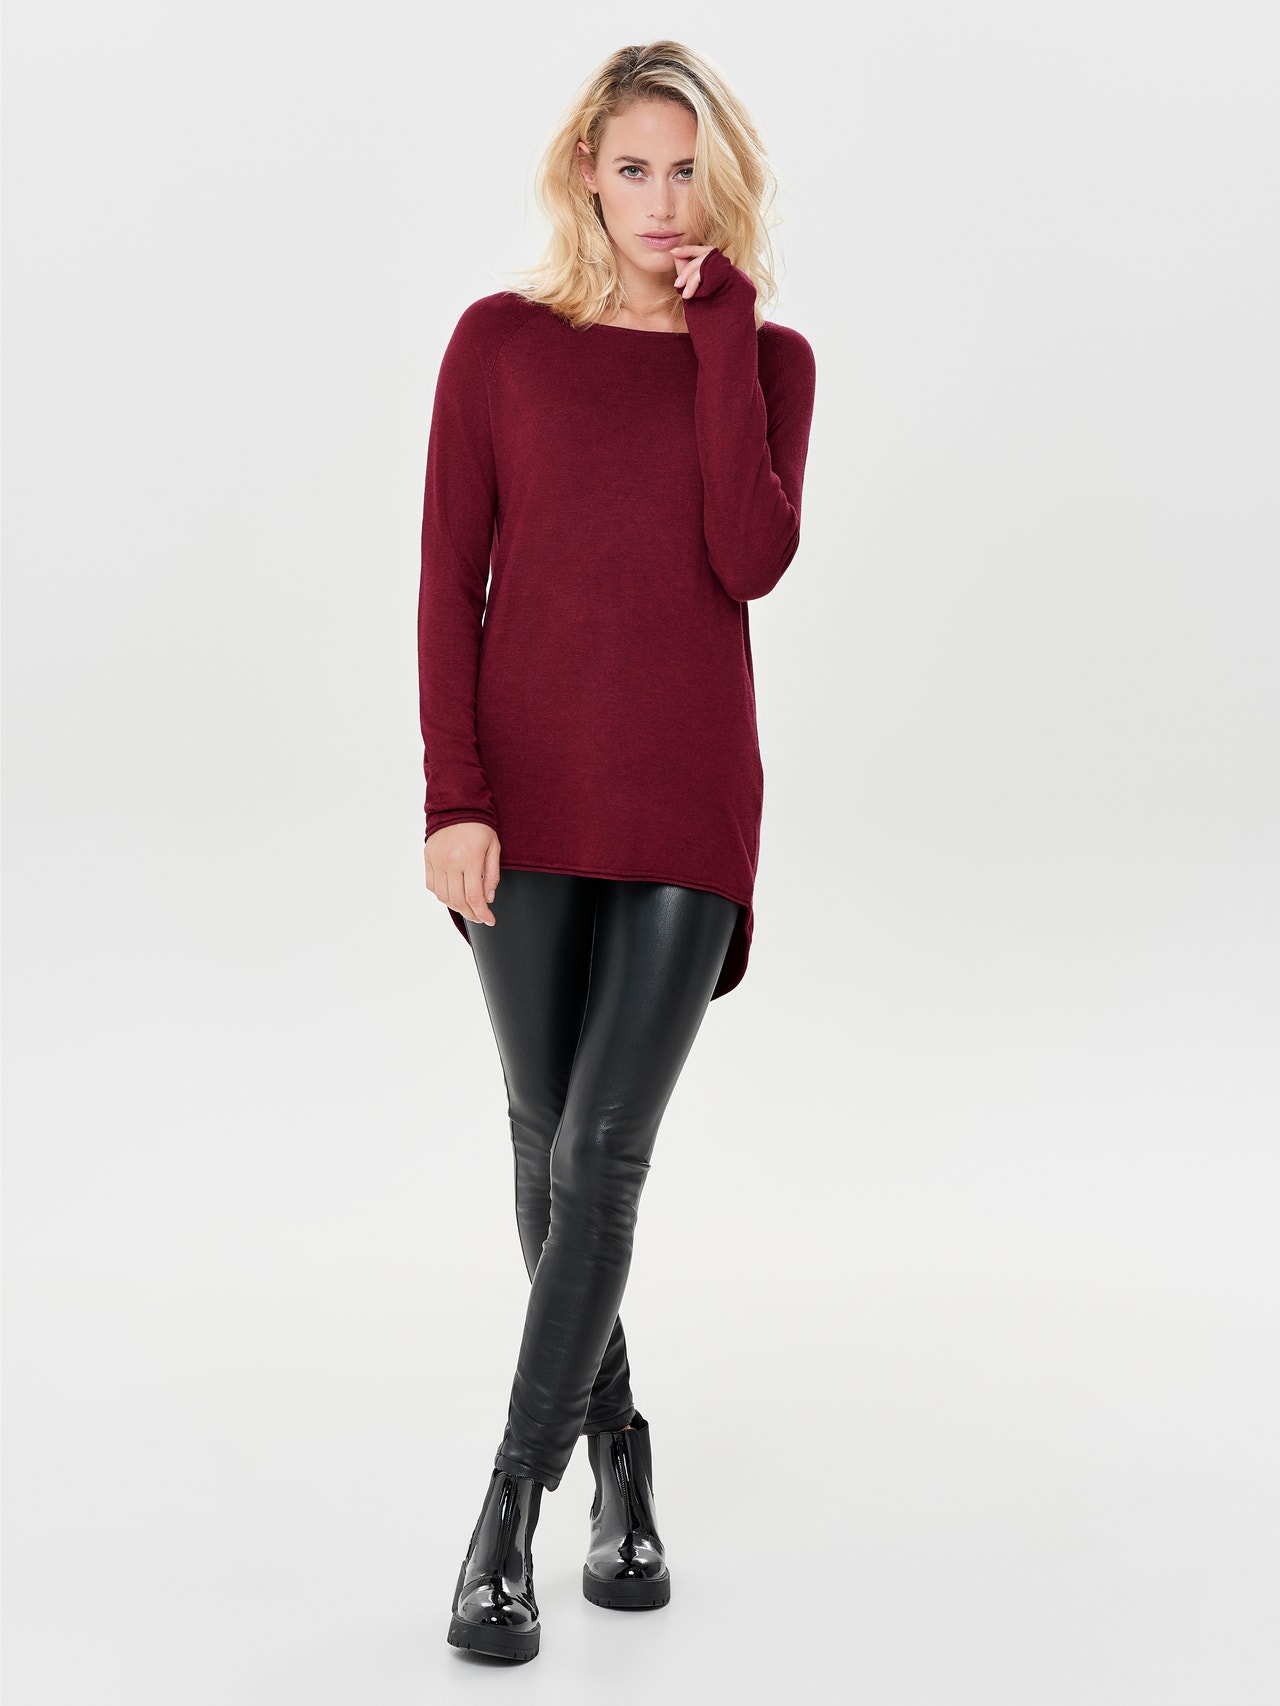 ONLY Round Neck Pullover -Sun-Dried Tomato - 15109964